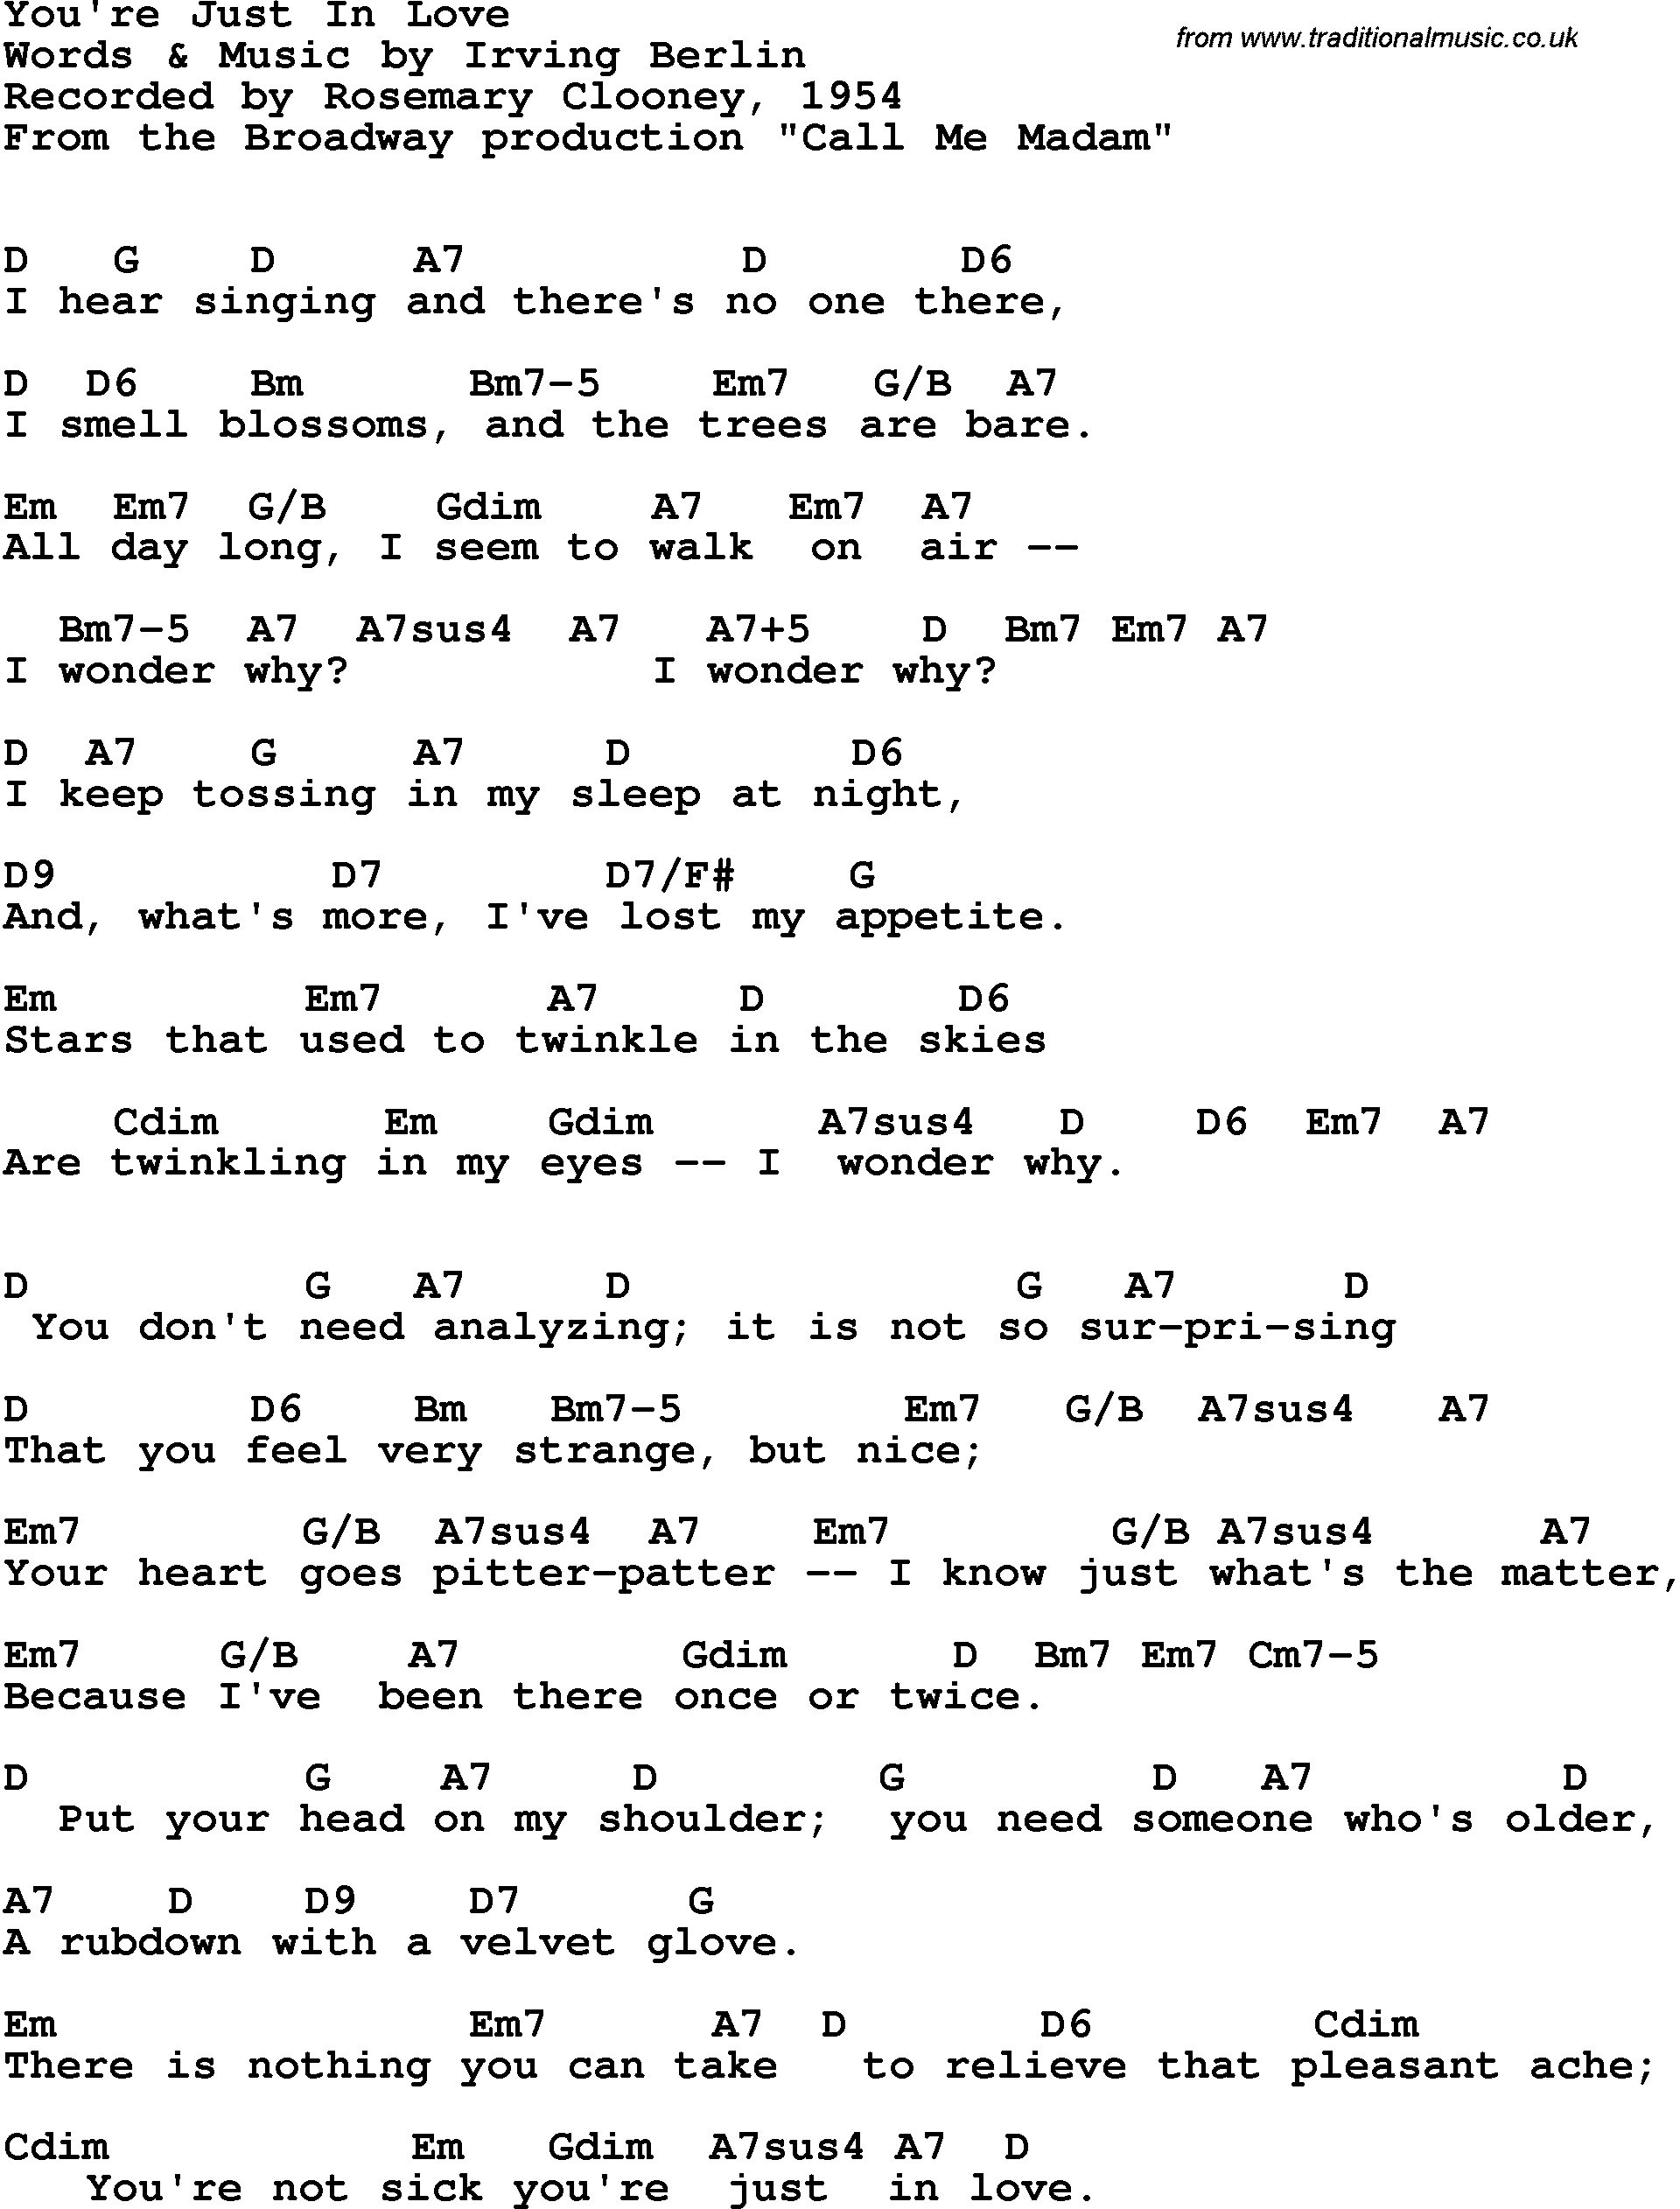 Song Lyrics with guitar chords for You're Just In Love - Rosemary Clooney, 1954